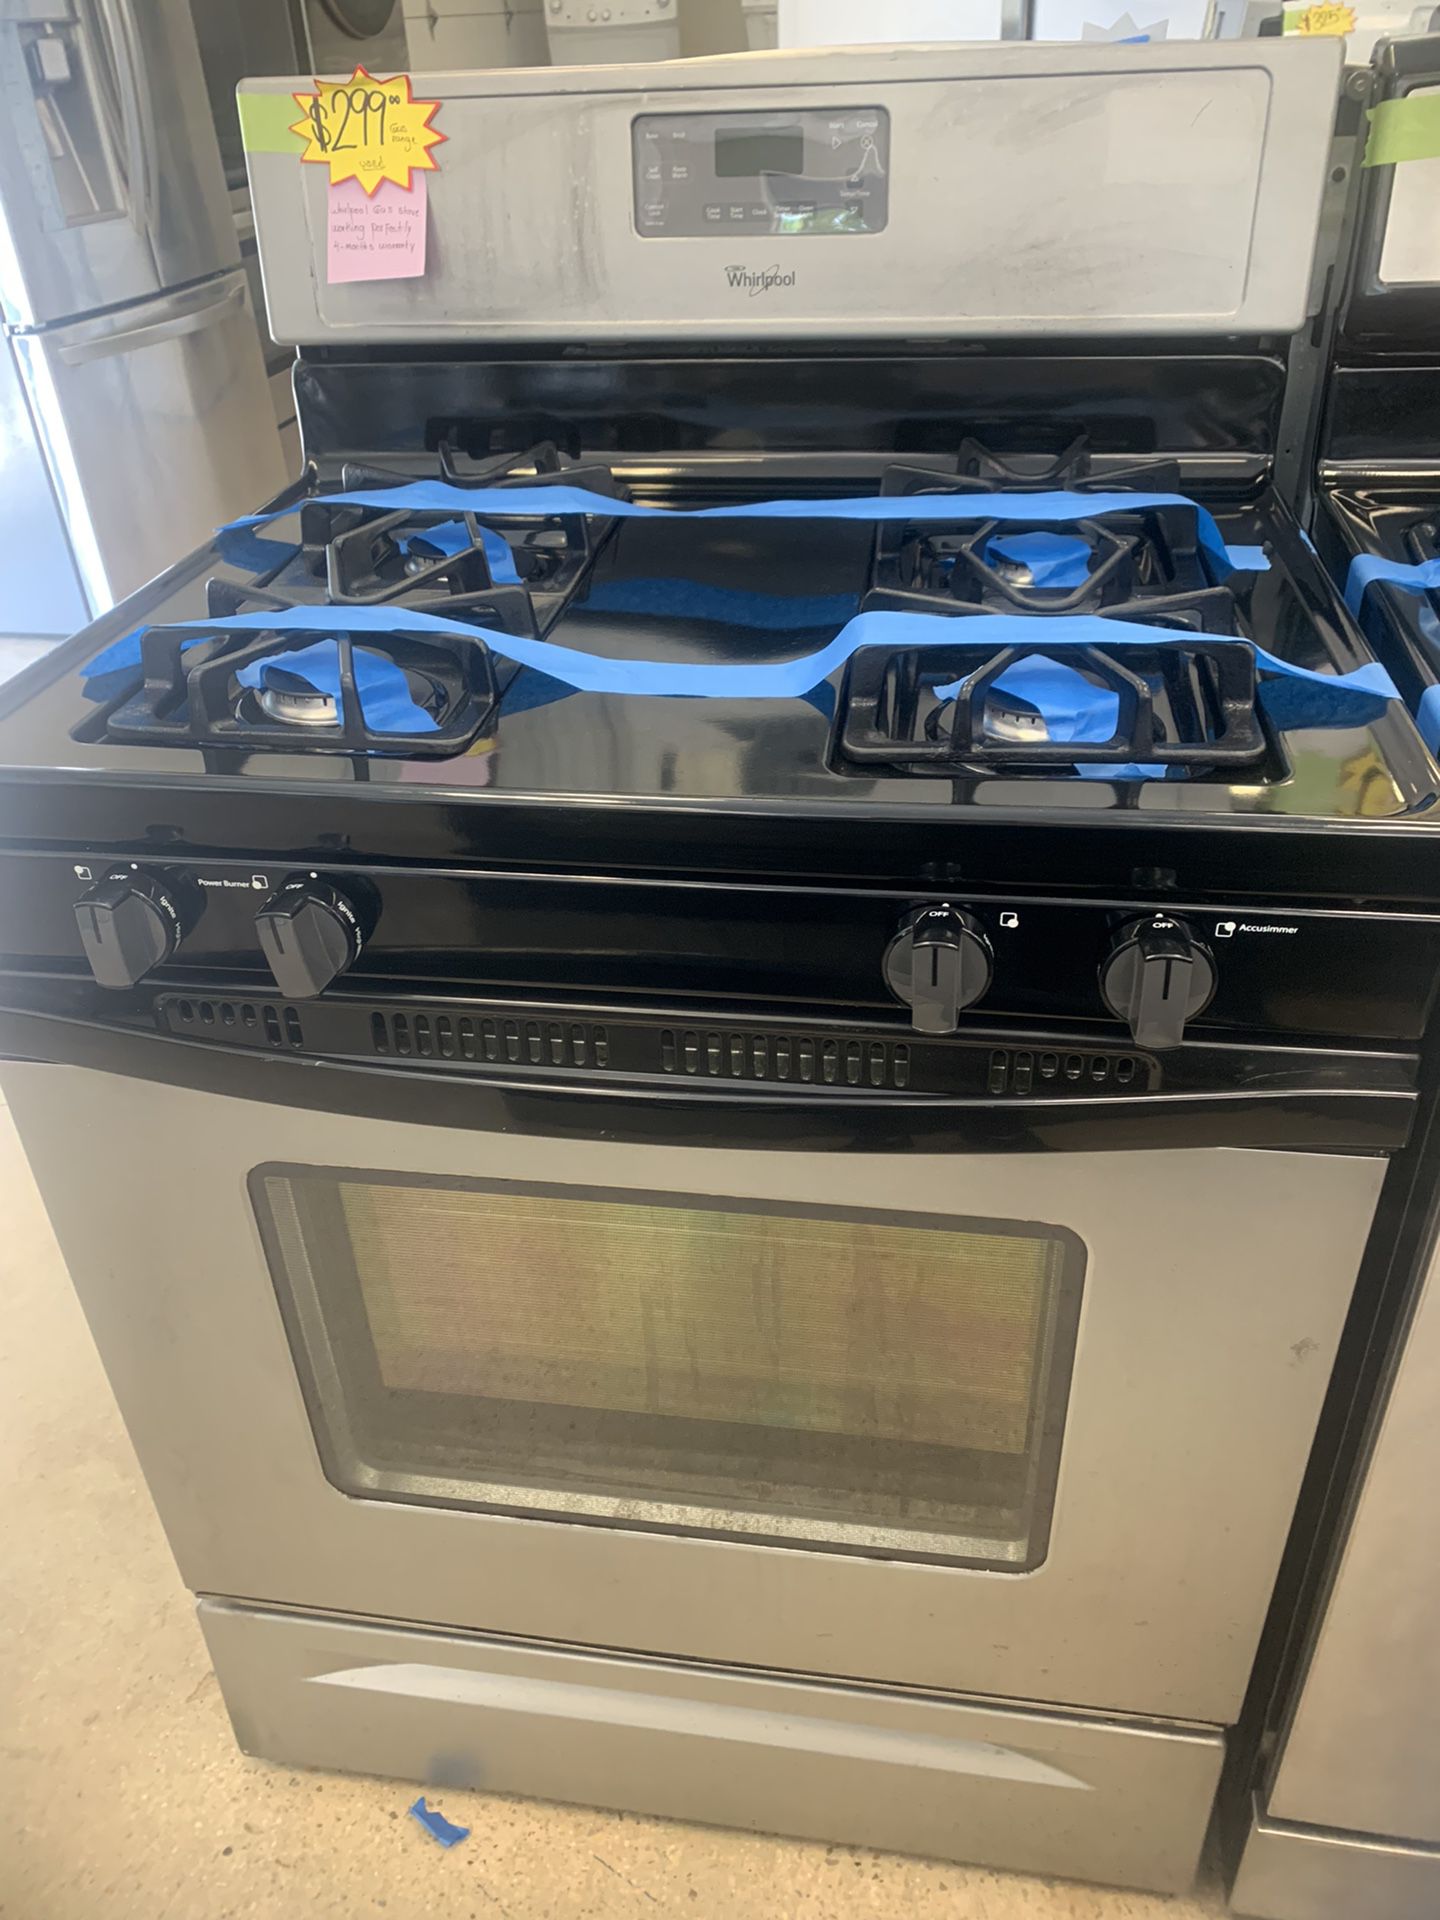 Whirlpool Used Gas Stove Working Perfectly 4 Months Warranty 